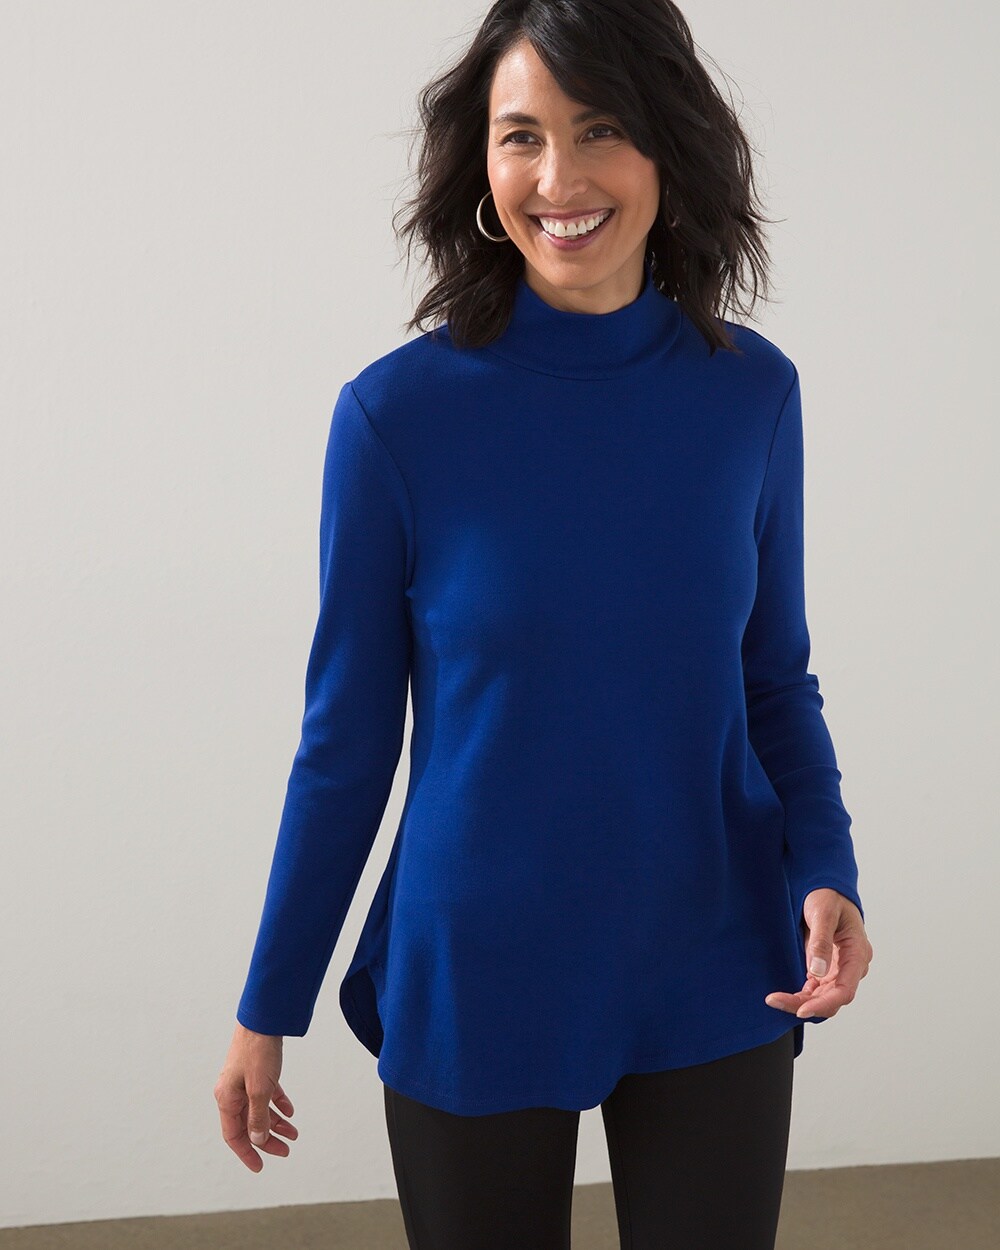 Pima Mock Neck Zip Back Tunic video preview image, click to start video